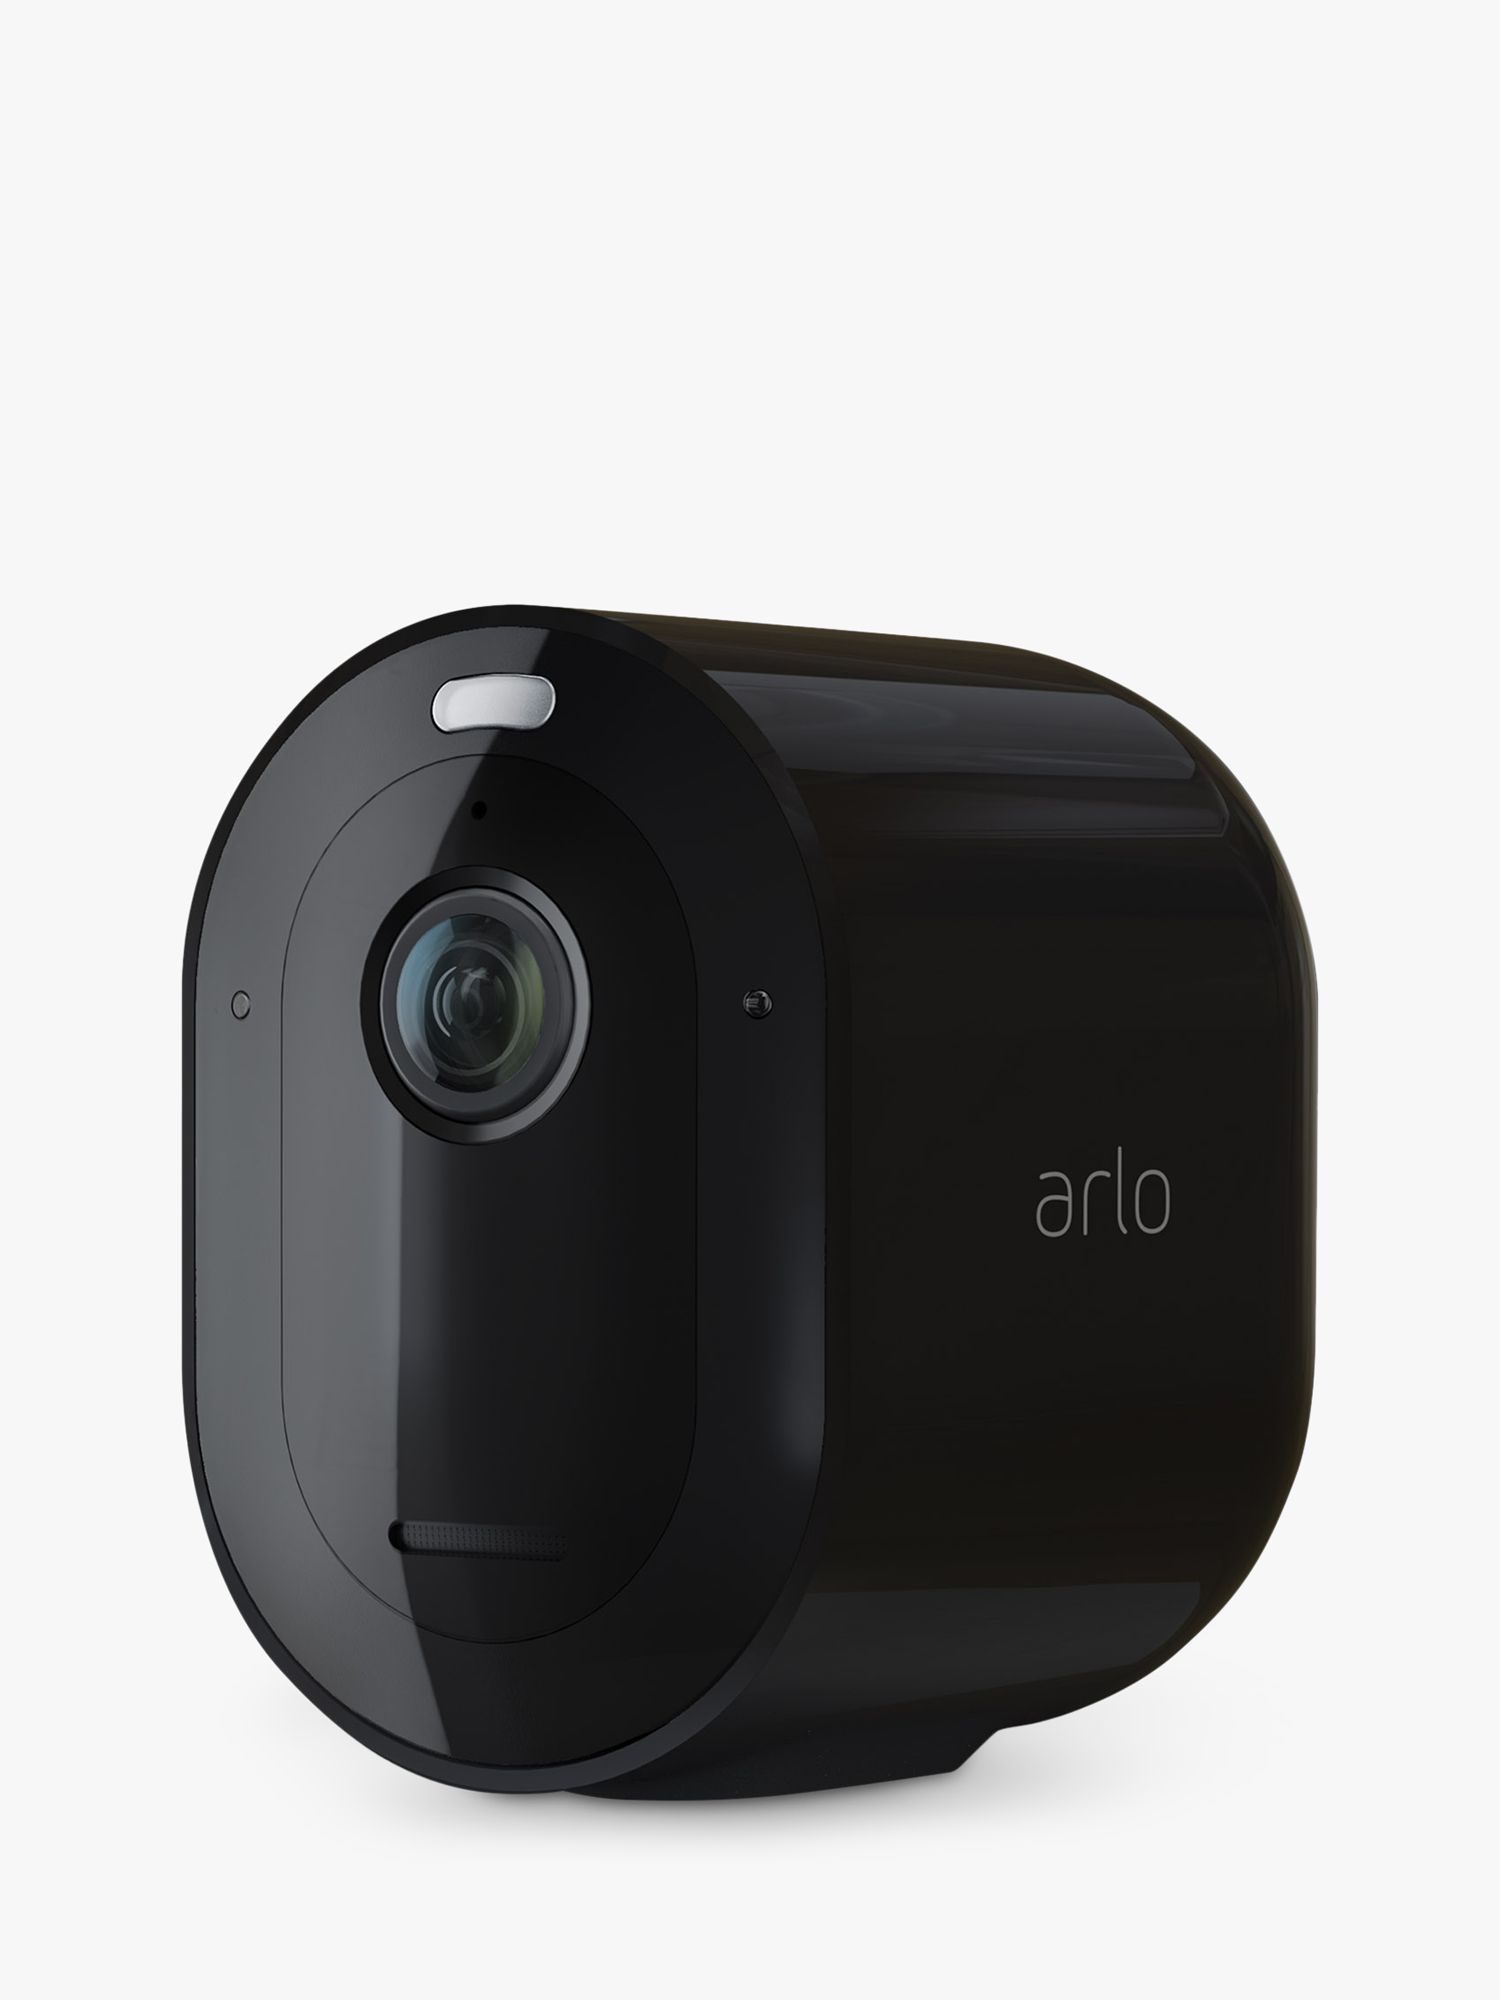 Arlo Pro 4 Wireless Smart Security System with One 2K HDR or Outdoor Camera, Black